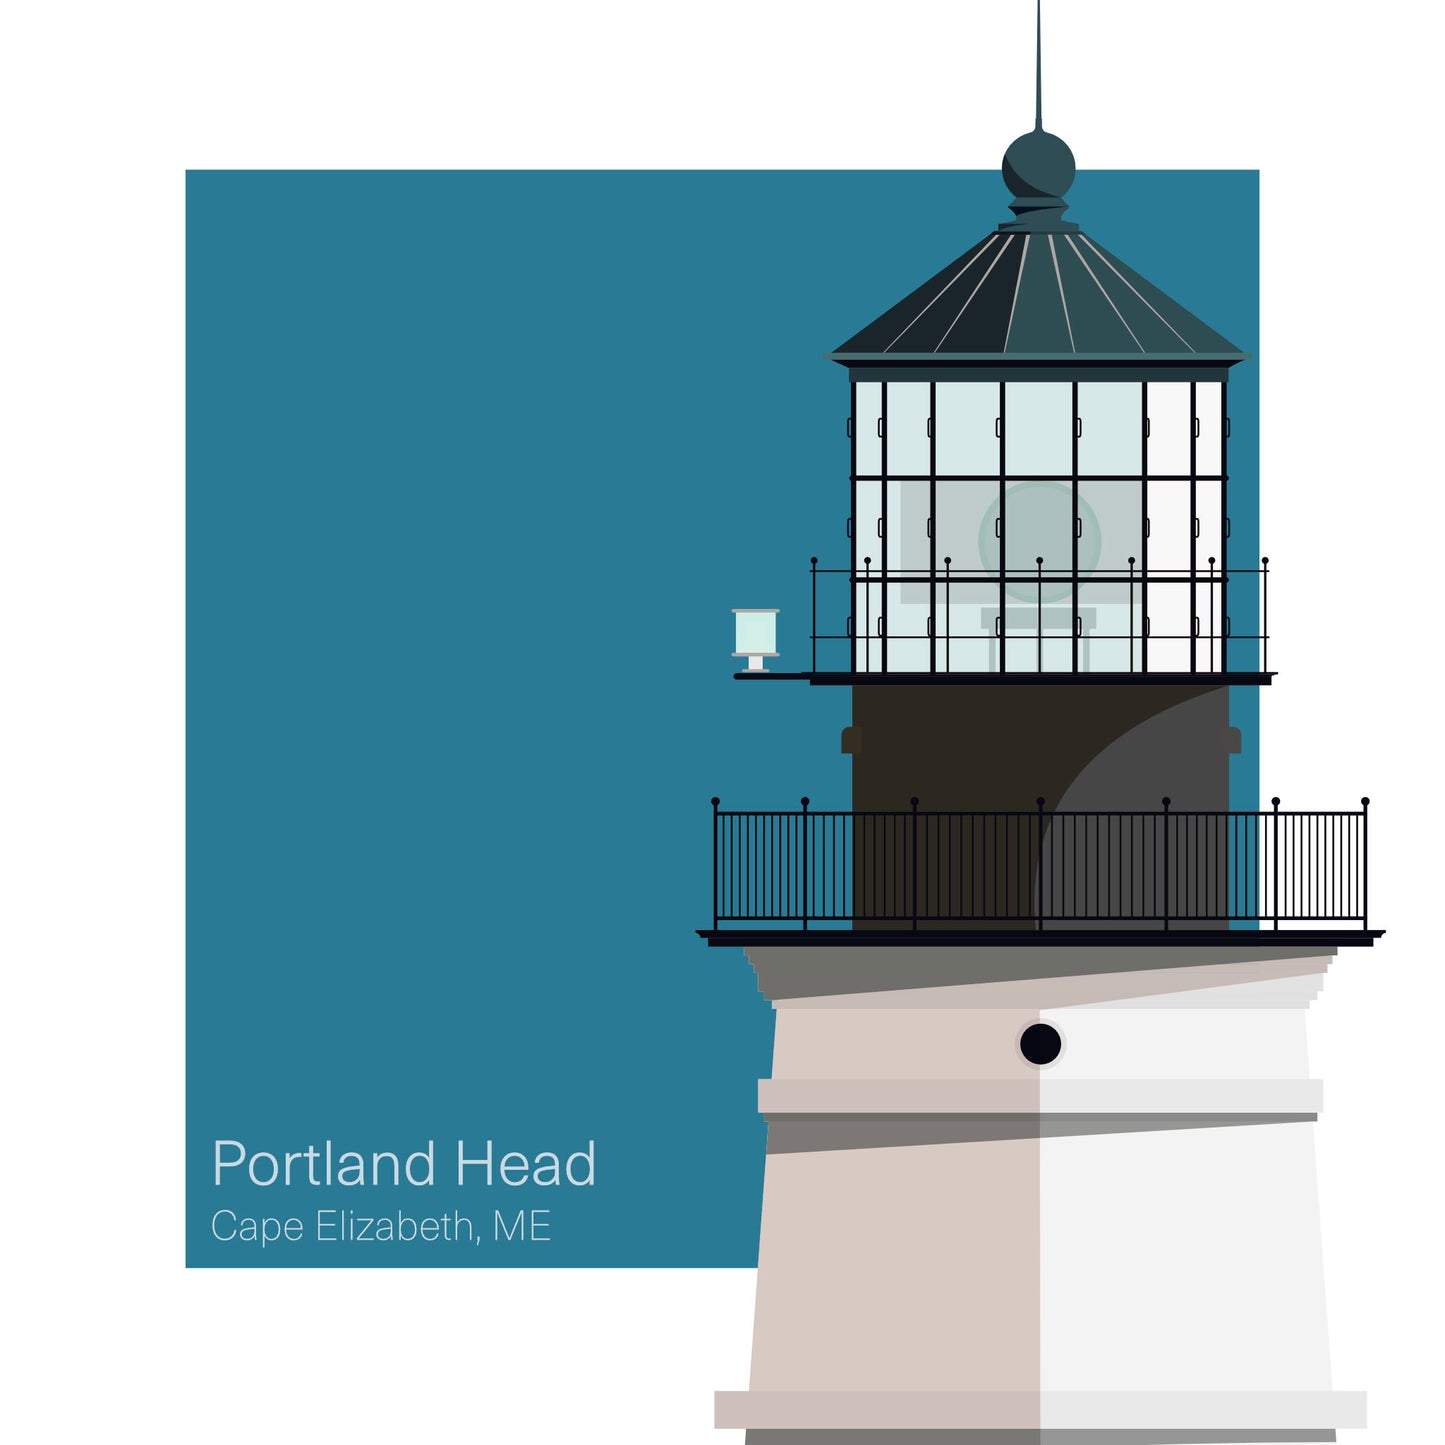 Illustration of the Portland Head lighthouse, ME, USA. On a white background with aqua blue square as a backdrop.